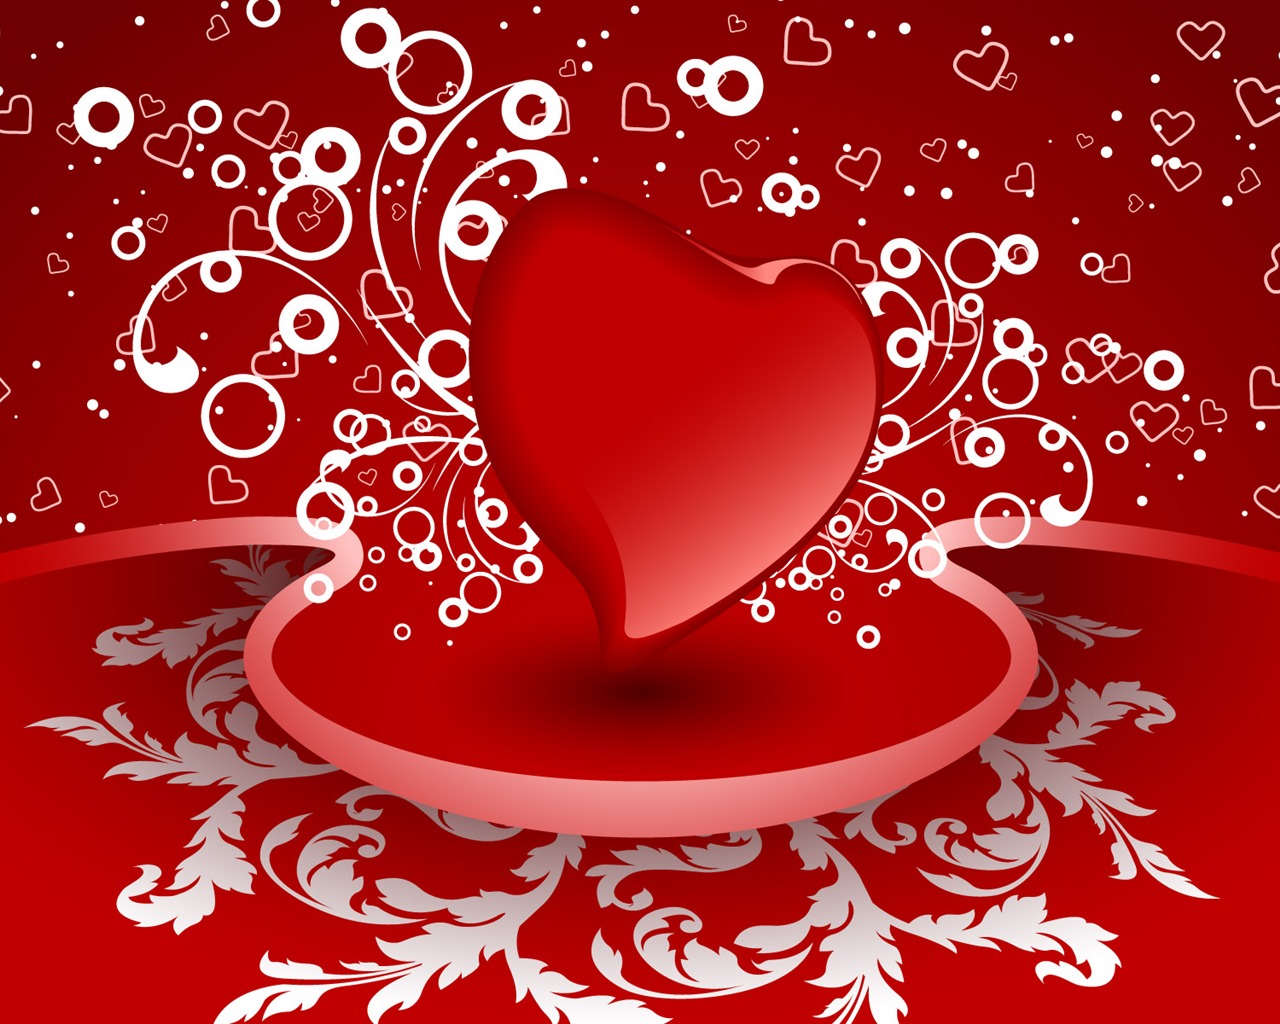 Valentine's Day Love Theme Wallpapers (2) #8 - 1280x1024